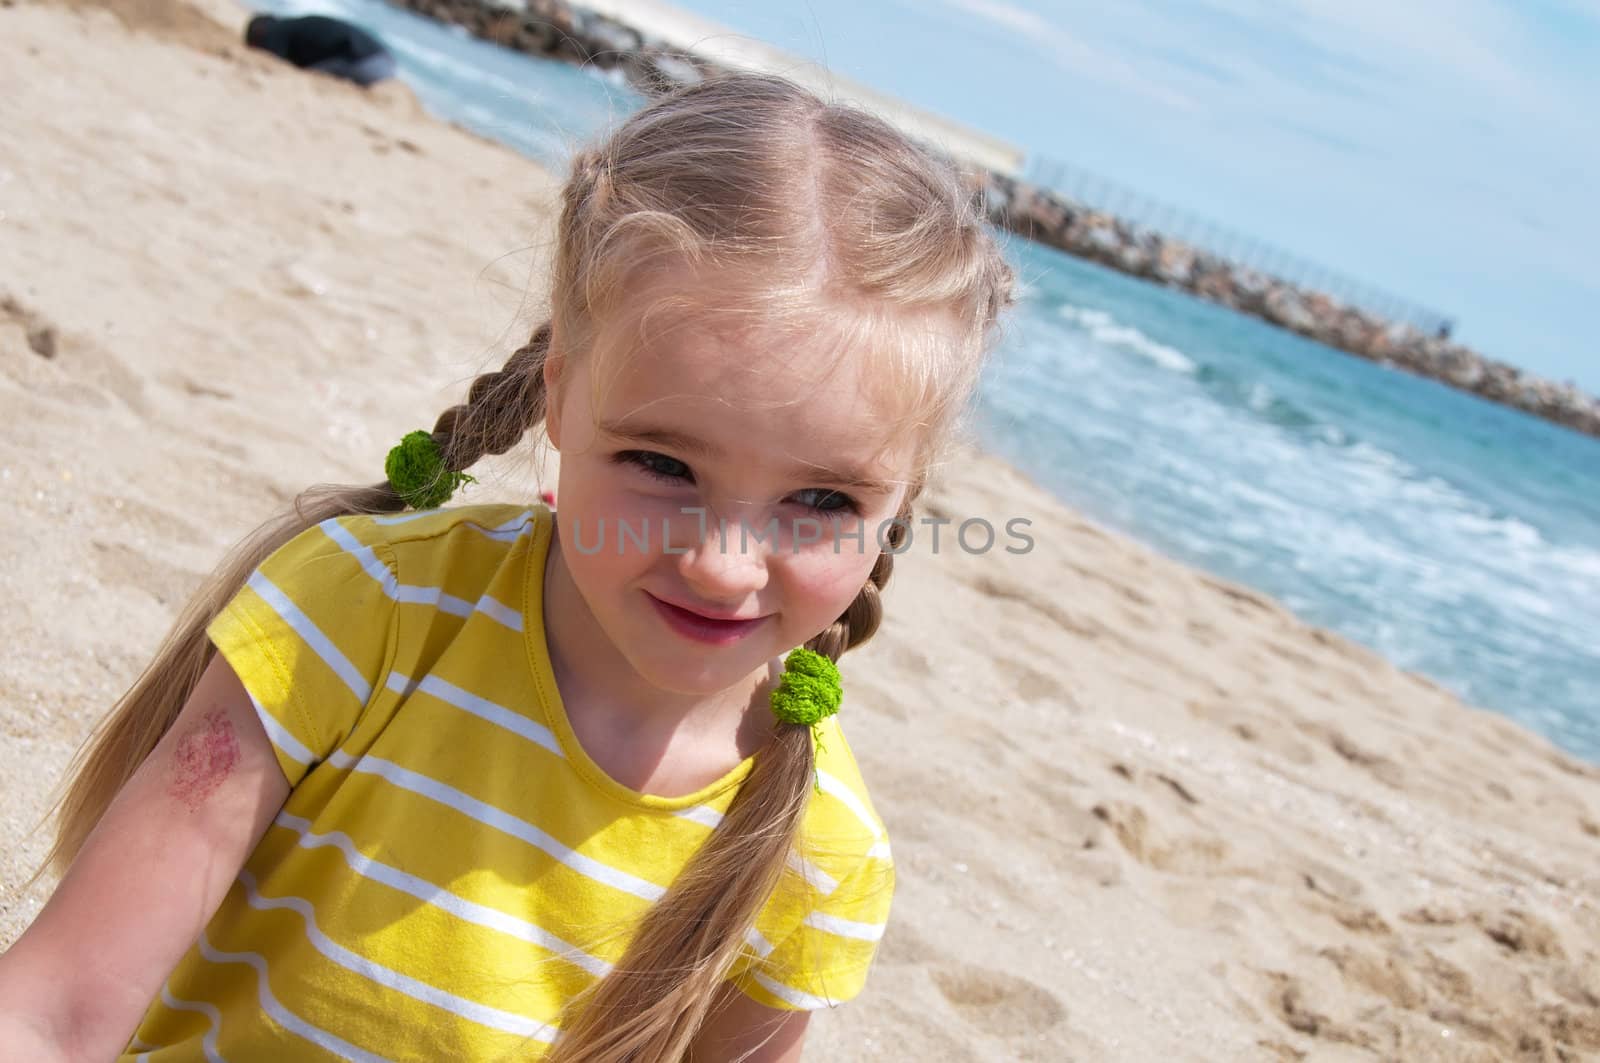 Little girl in yellow t-shirt sitting on the beach